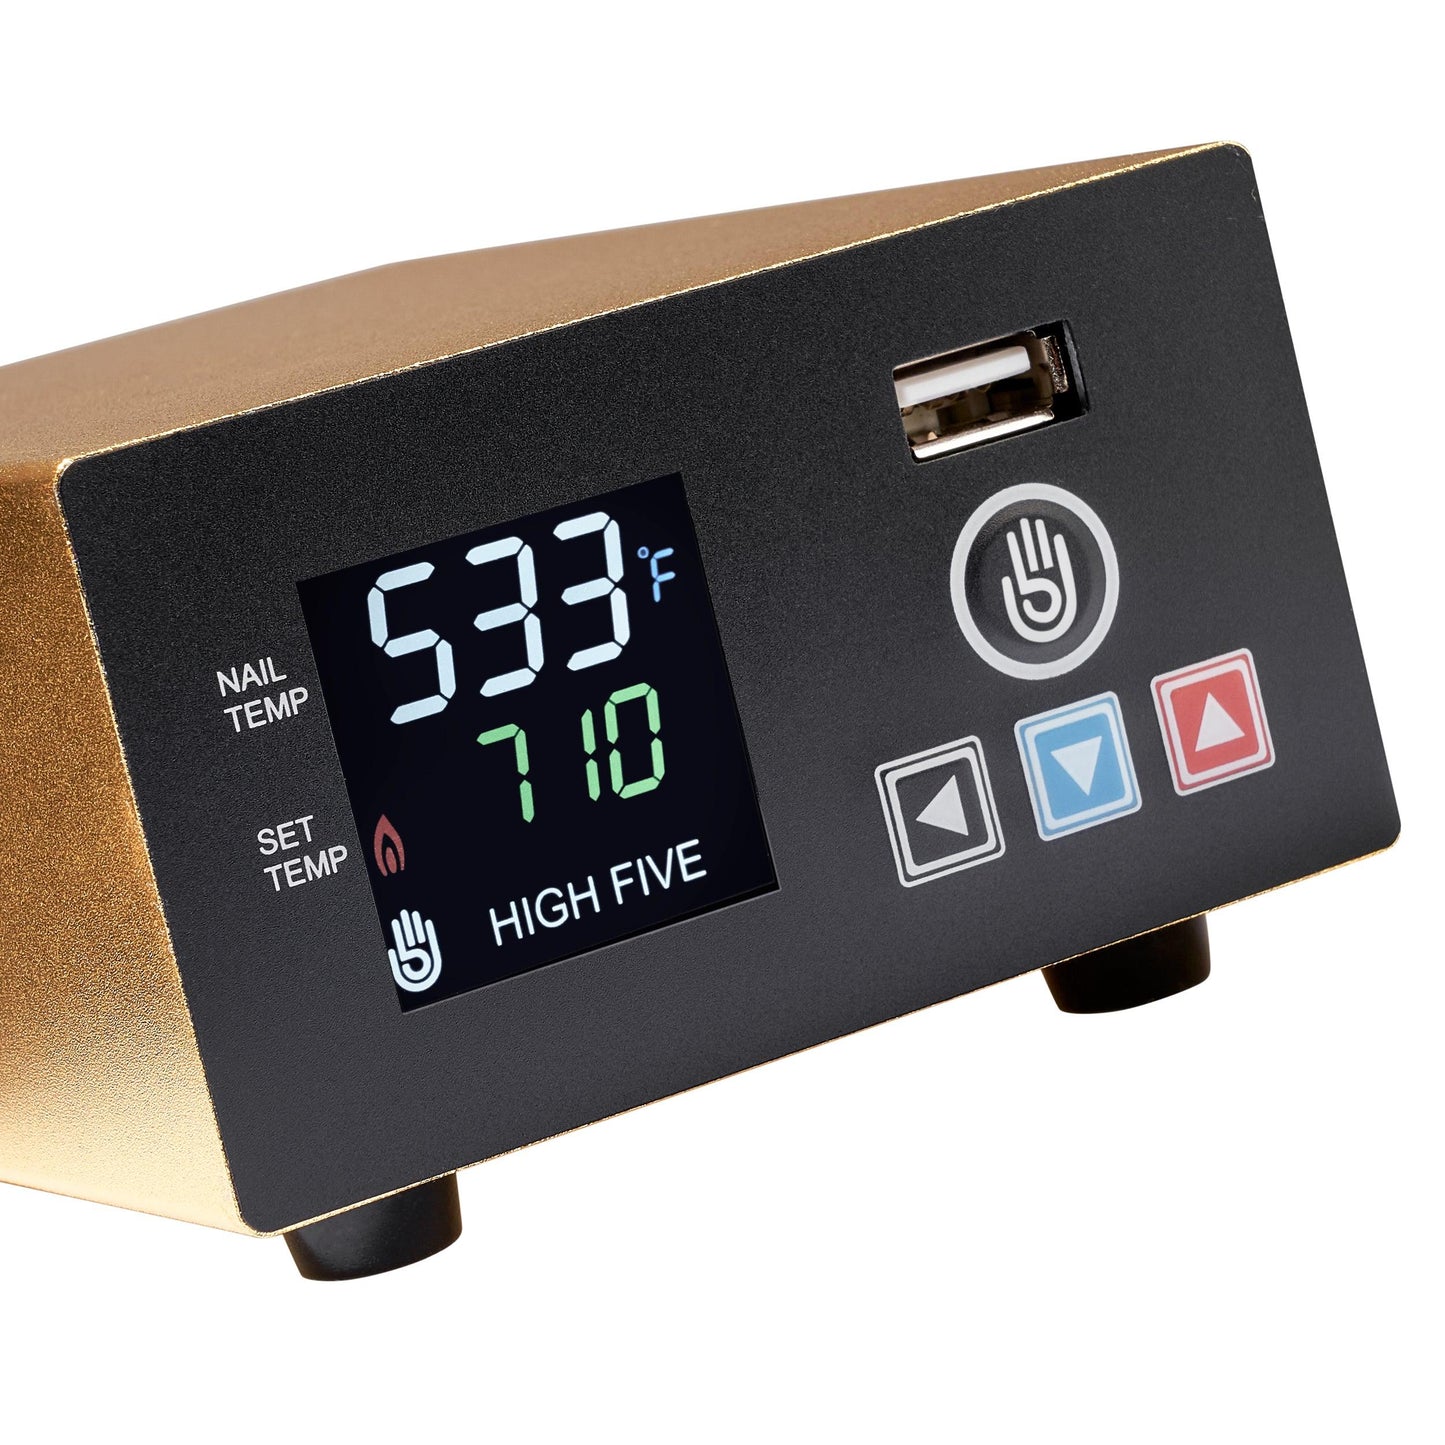 LCD E-Nail with Heater Coil - High Five